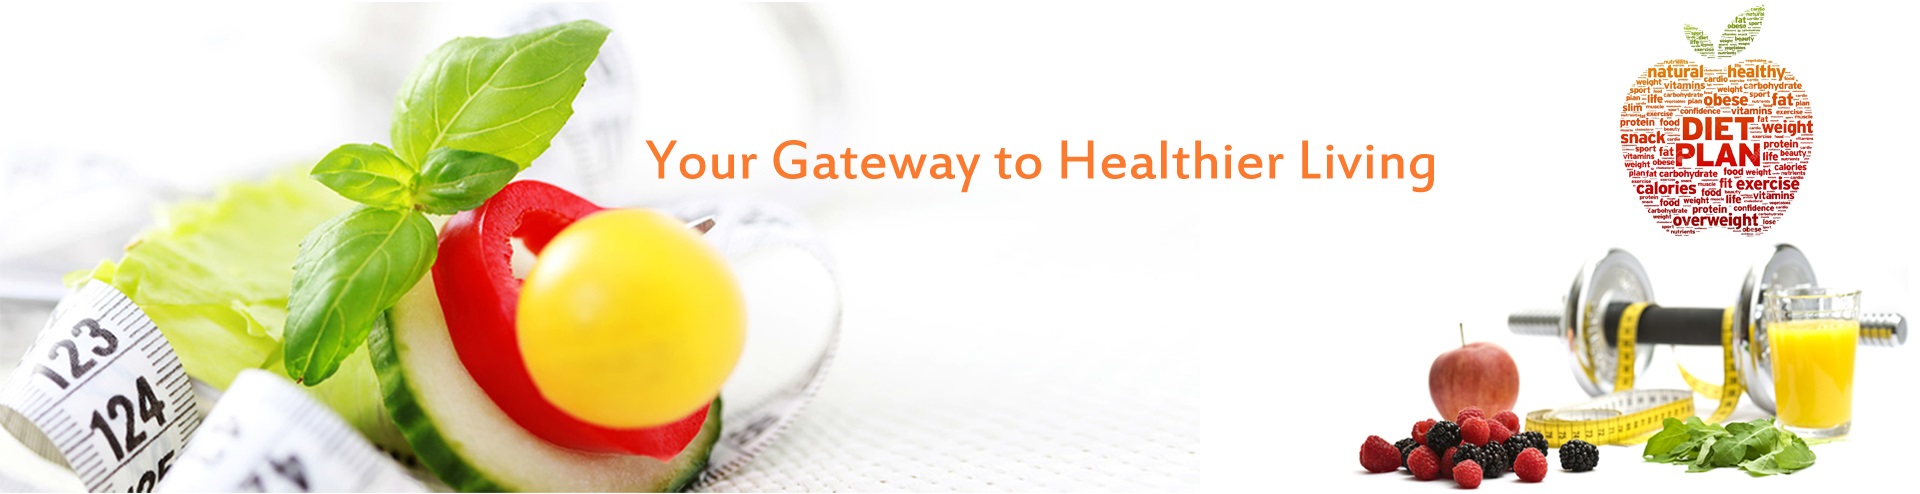 Your Gateway to Healthier Living